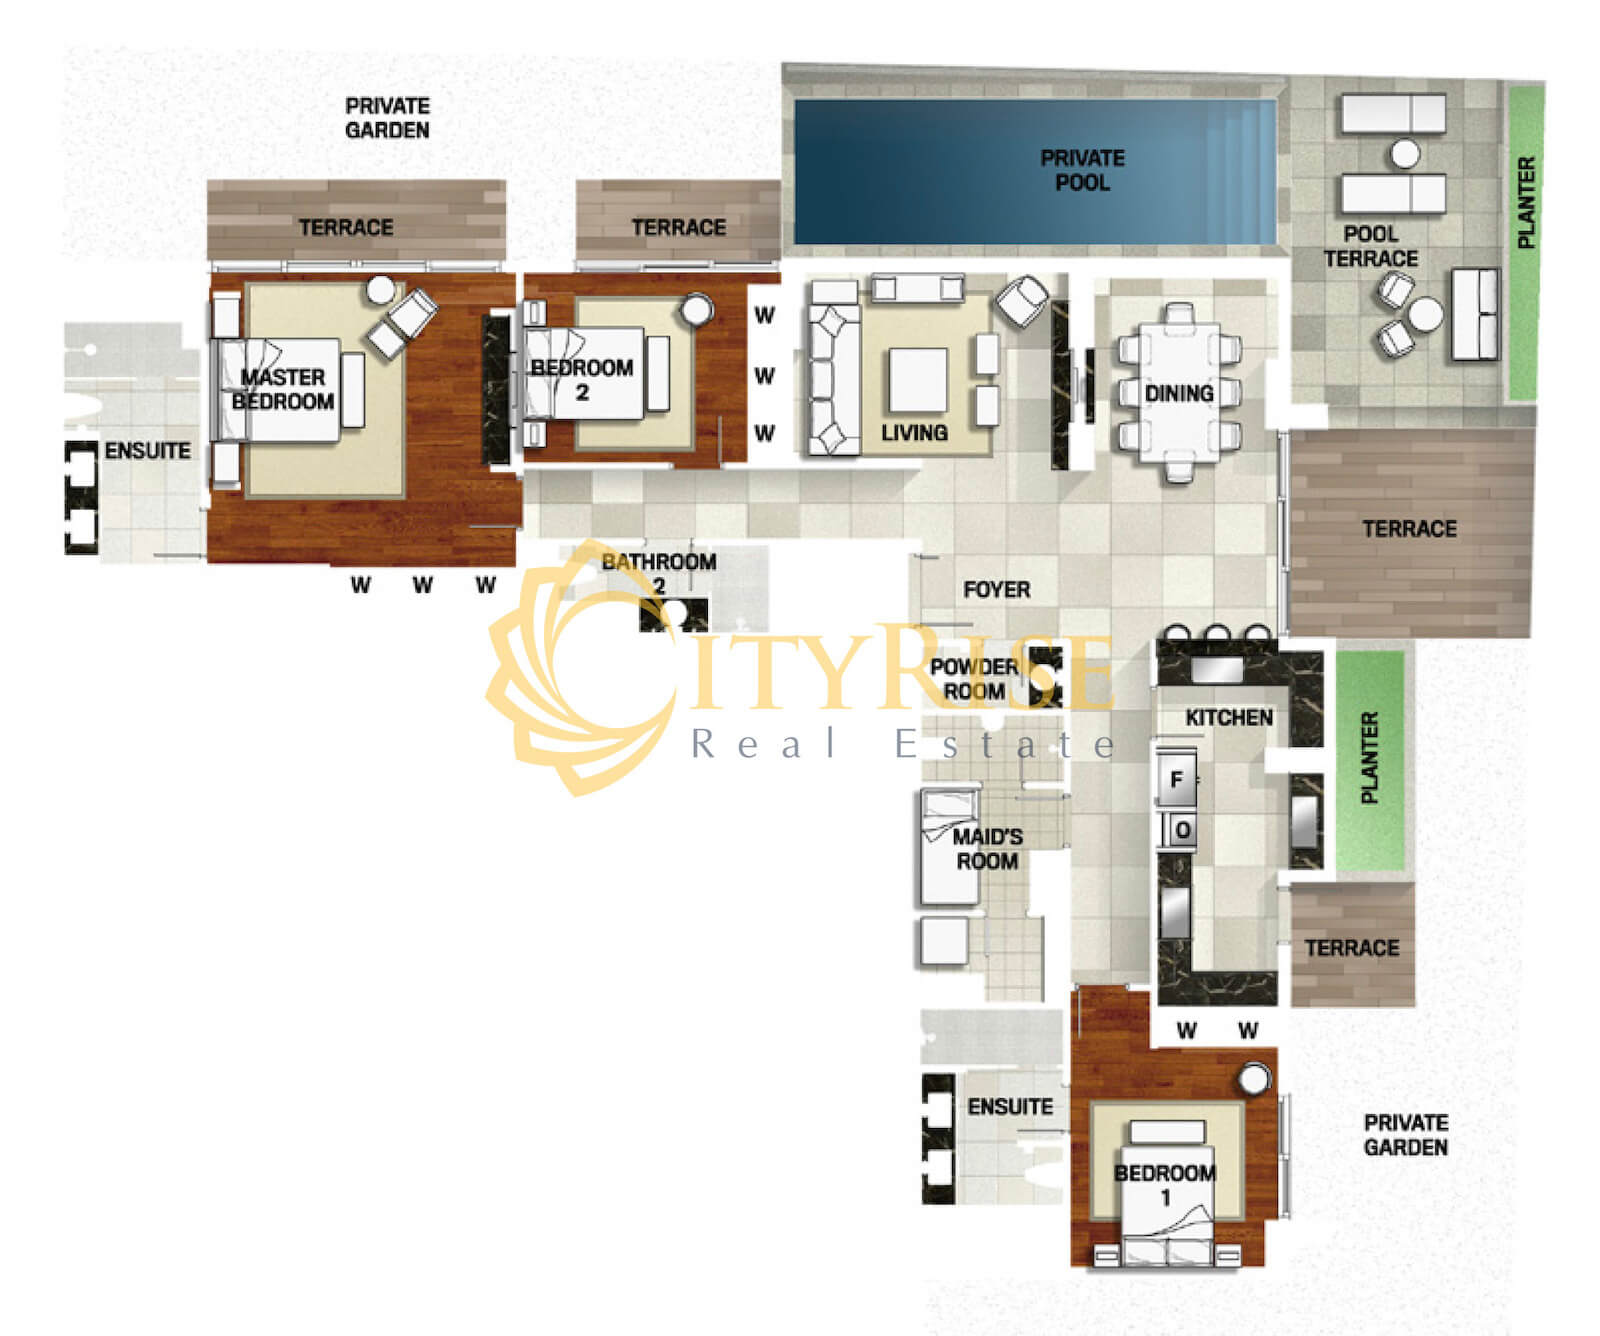 Floor plan of The Albany Gateway Thao Dien apartment in District 2